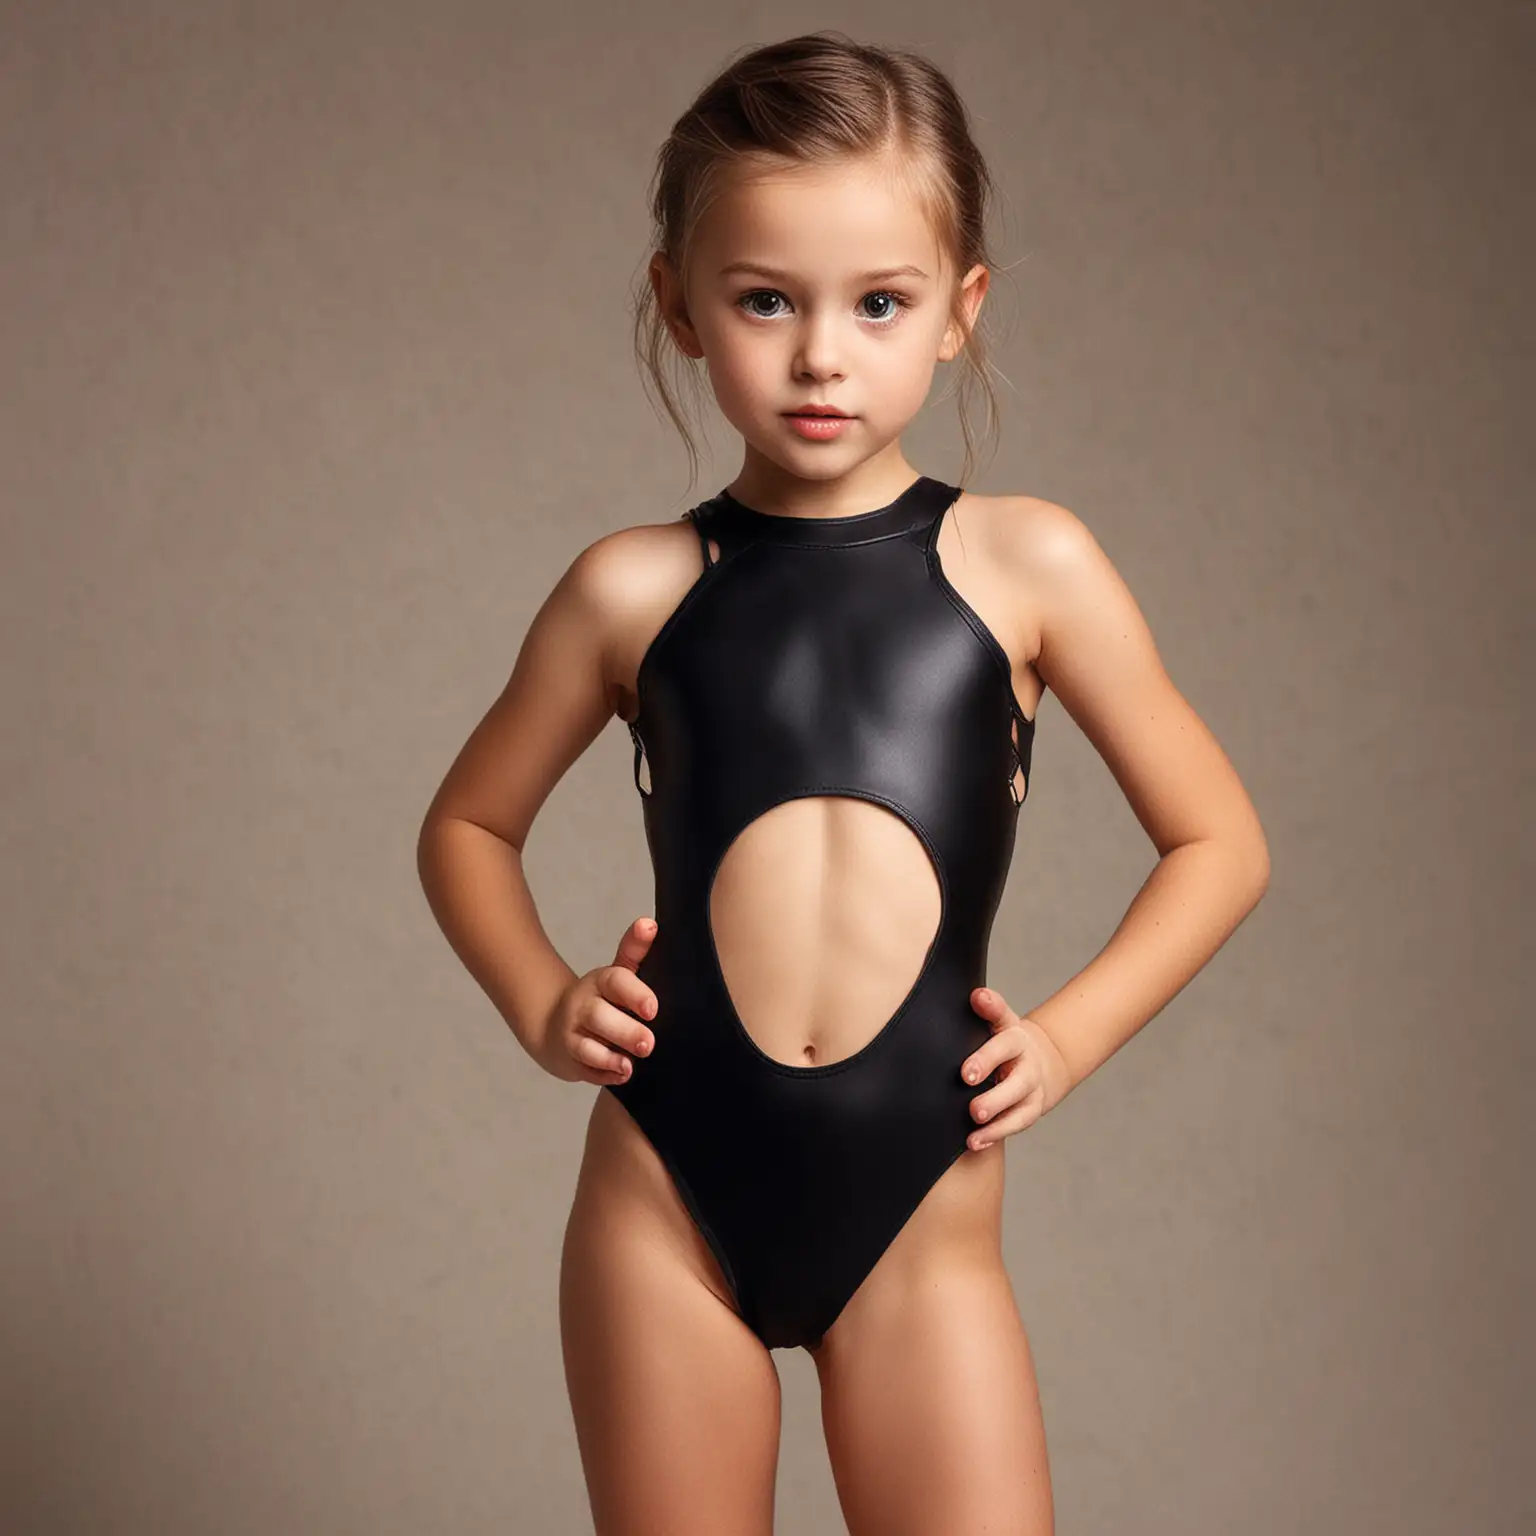 Young-Tiny-Model-in-Unique-Cutout-Bodysuit-Pose